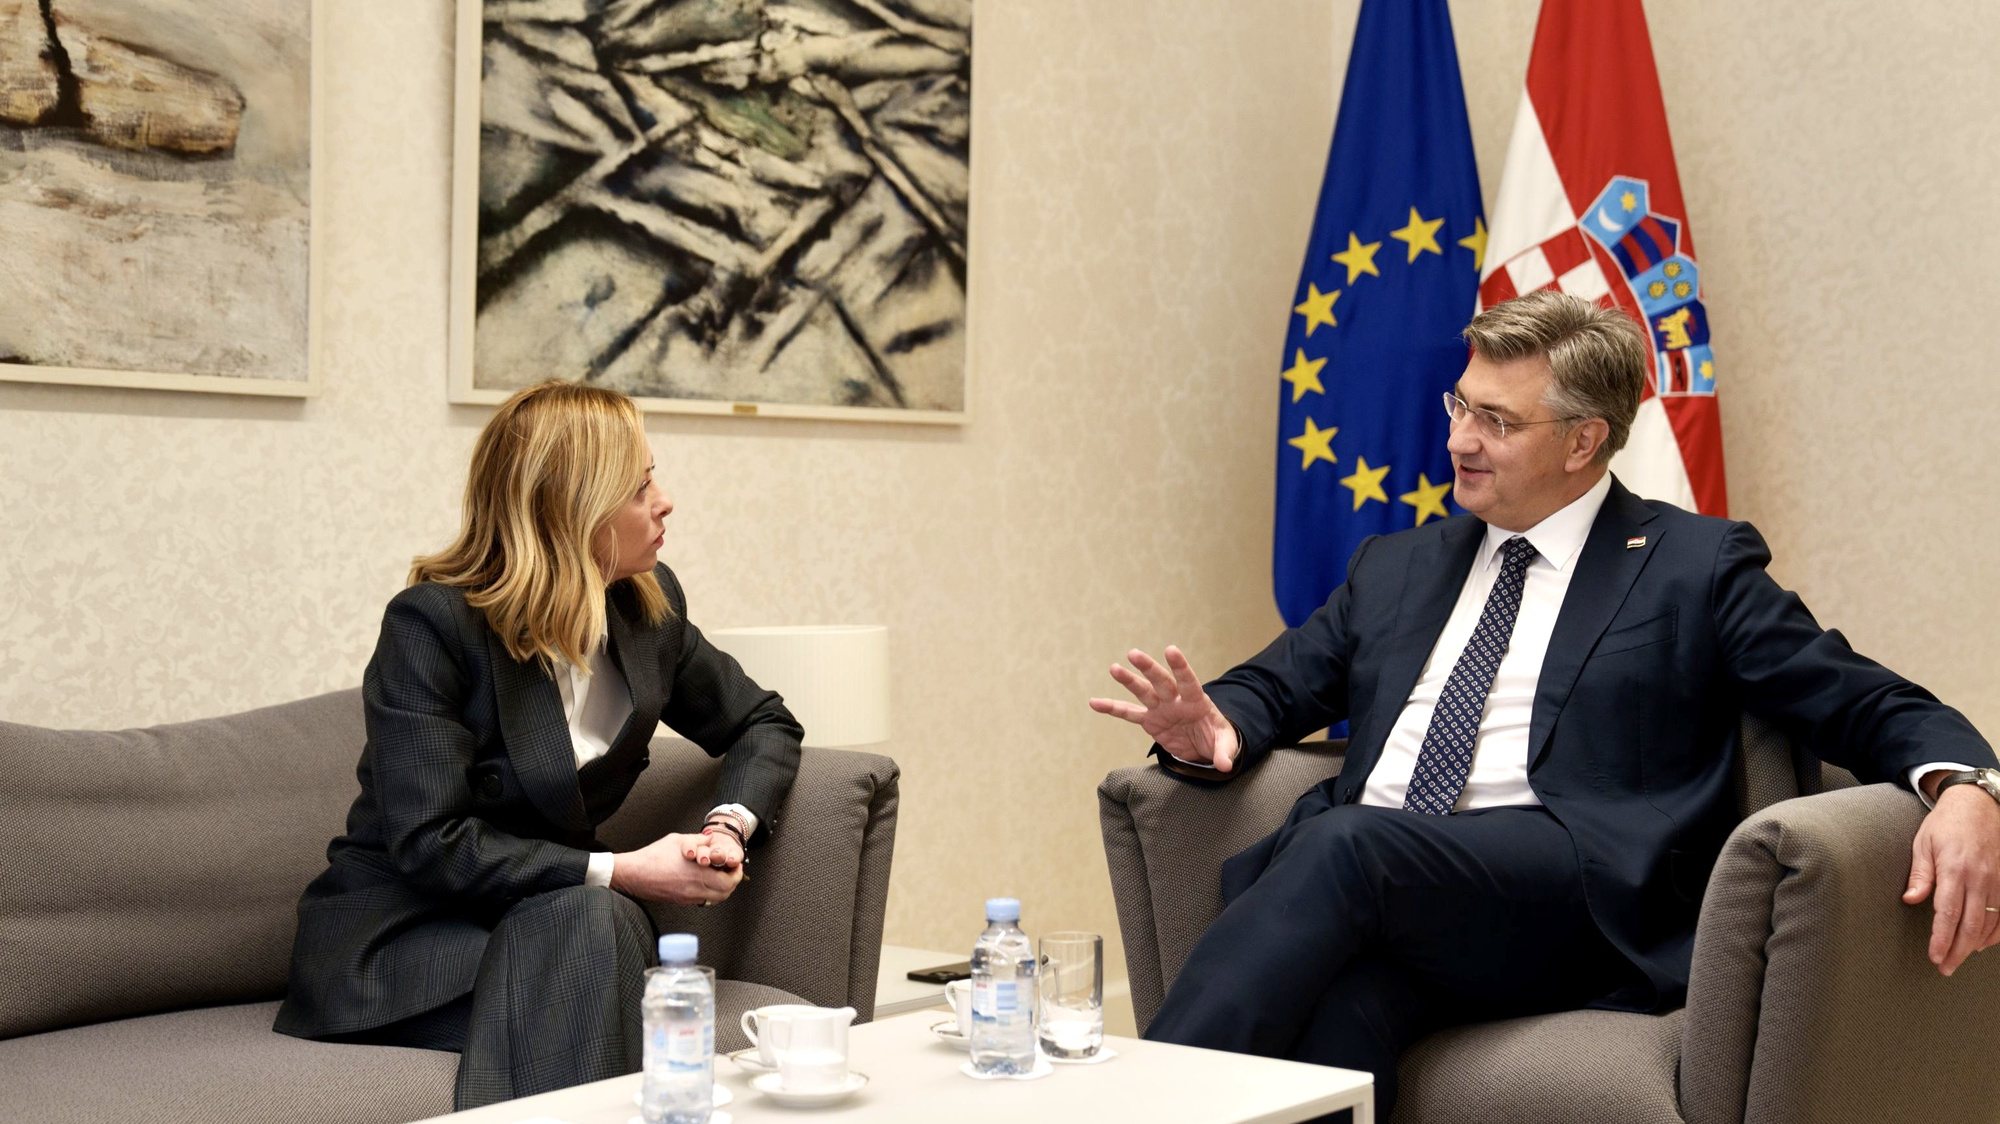 epa10980315 A handout photo made available by Chigi Palace Press Office shows Croatian Prime Minister Andrej Plenkovic (R) meeting with Italian Prime Minister Giorgia Meloni (L) during her official visit, in Zagreb, Croatia, 17 November 2023. Meloni is on a two-day visit to Croatia for talks that are expected to focus on migrants and EU enlargement to the Western Balkans.  EPA/CHIGI PALACE PRESS OFFICE/ FILIPPO ATTILI HANDOUT  HANDOUT EDITORIAL USE ONLY/NO SALES HANDOUT EDITORIAL USE ONLY/NO SALES